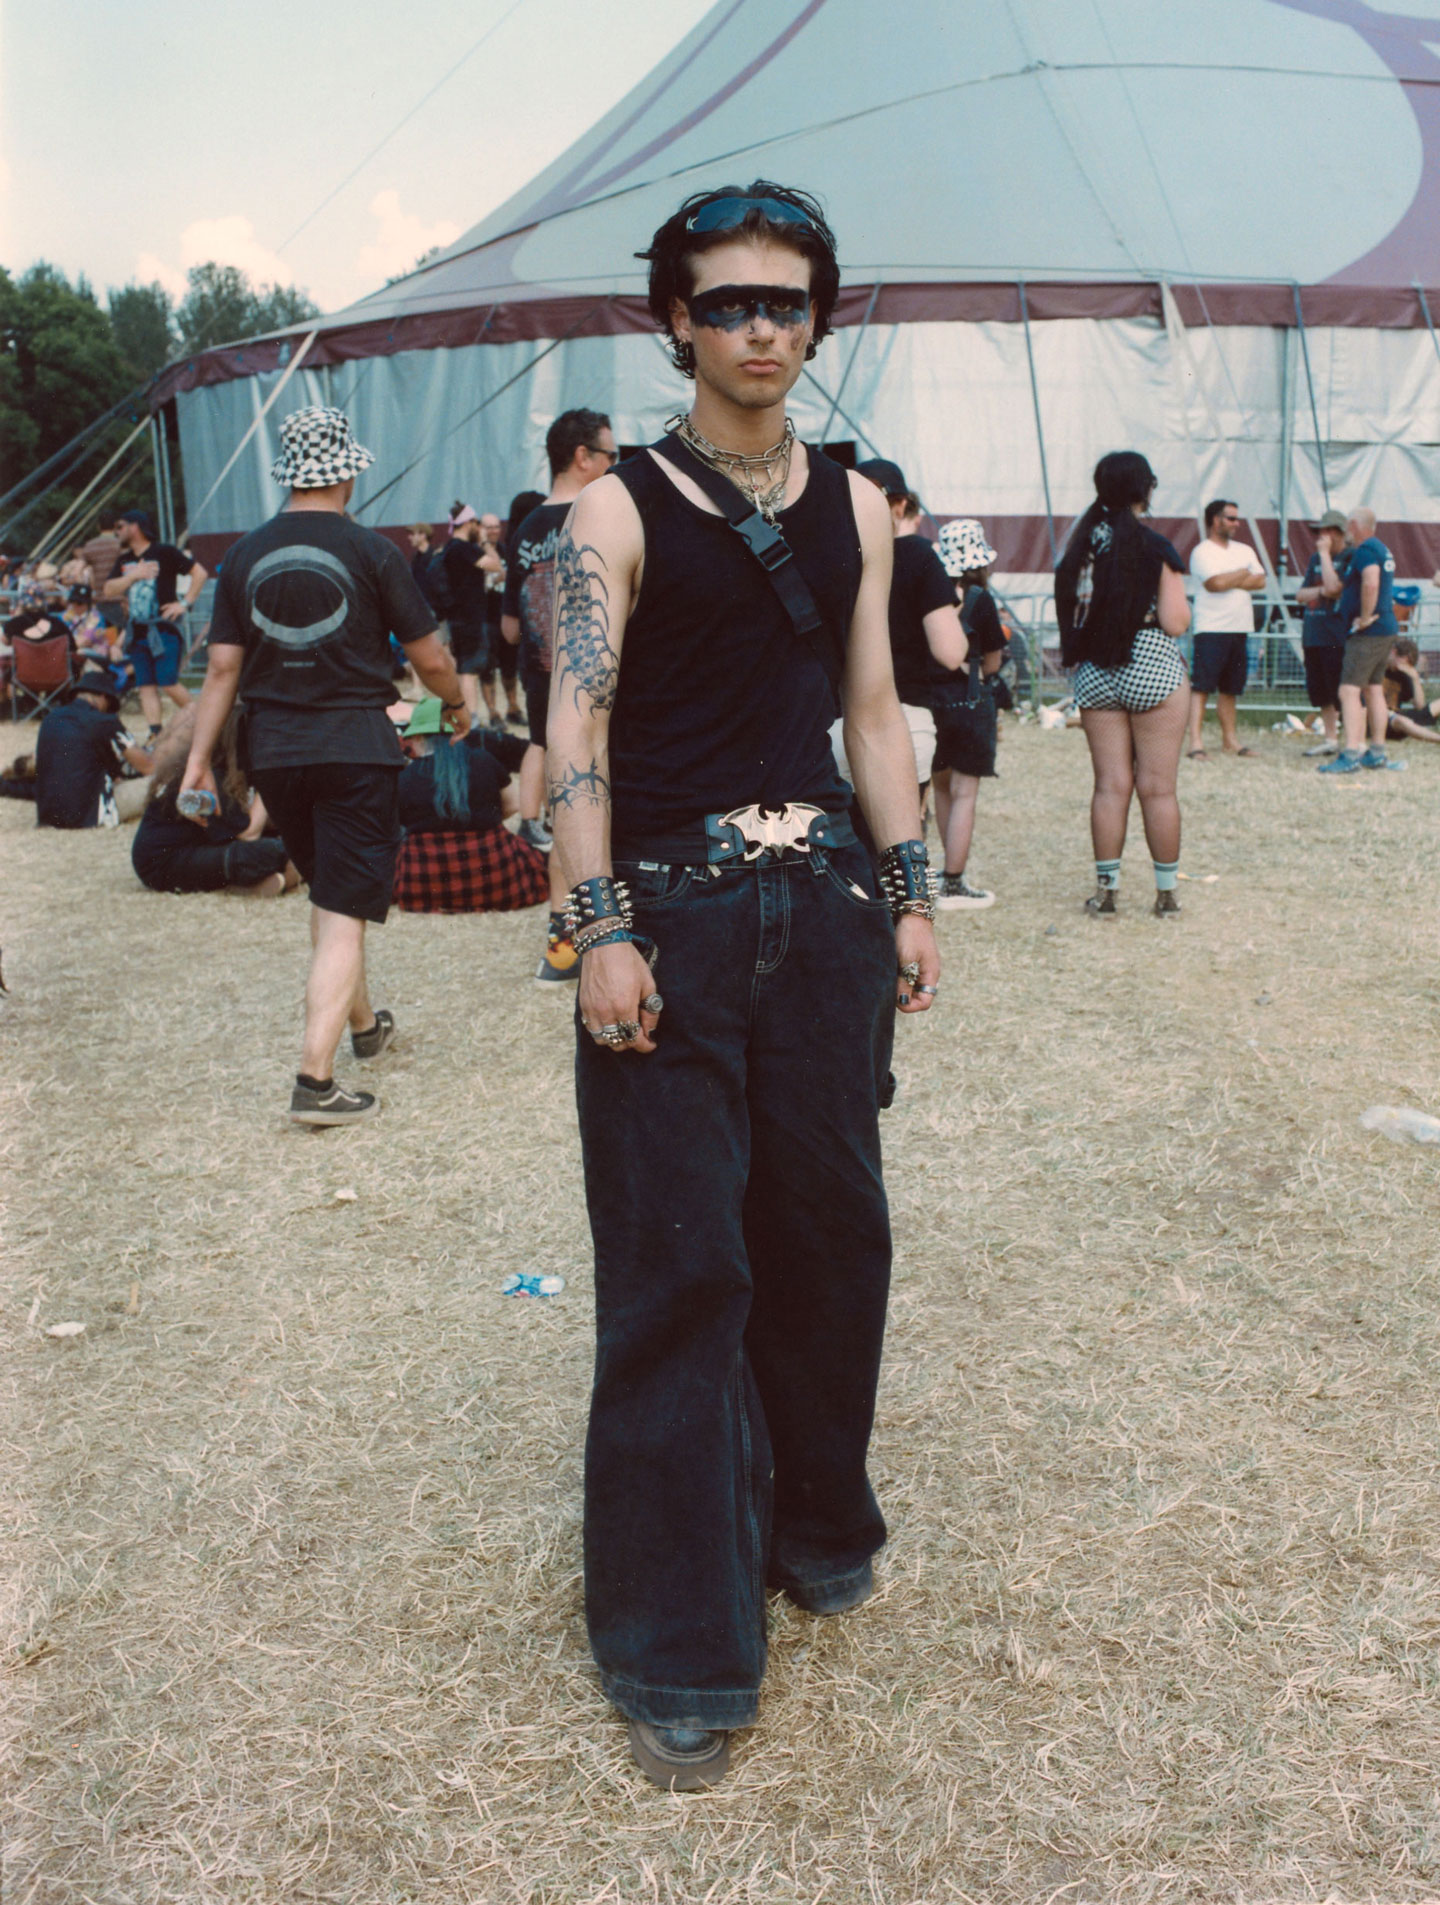 a teen boy with tattooed arms, baggy black jeans, a black tank top and a mask-like stripe painted over his eyes stands in front of a festival tent